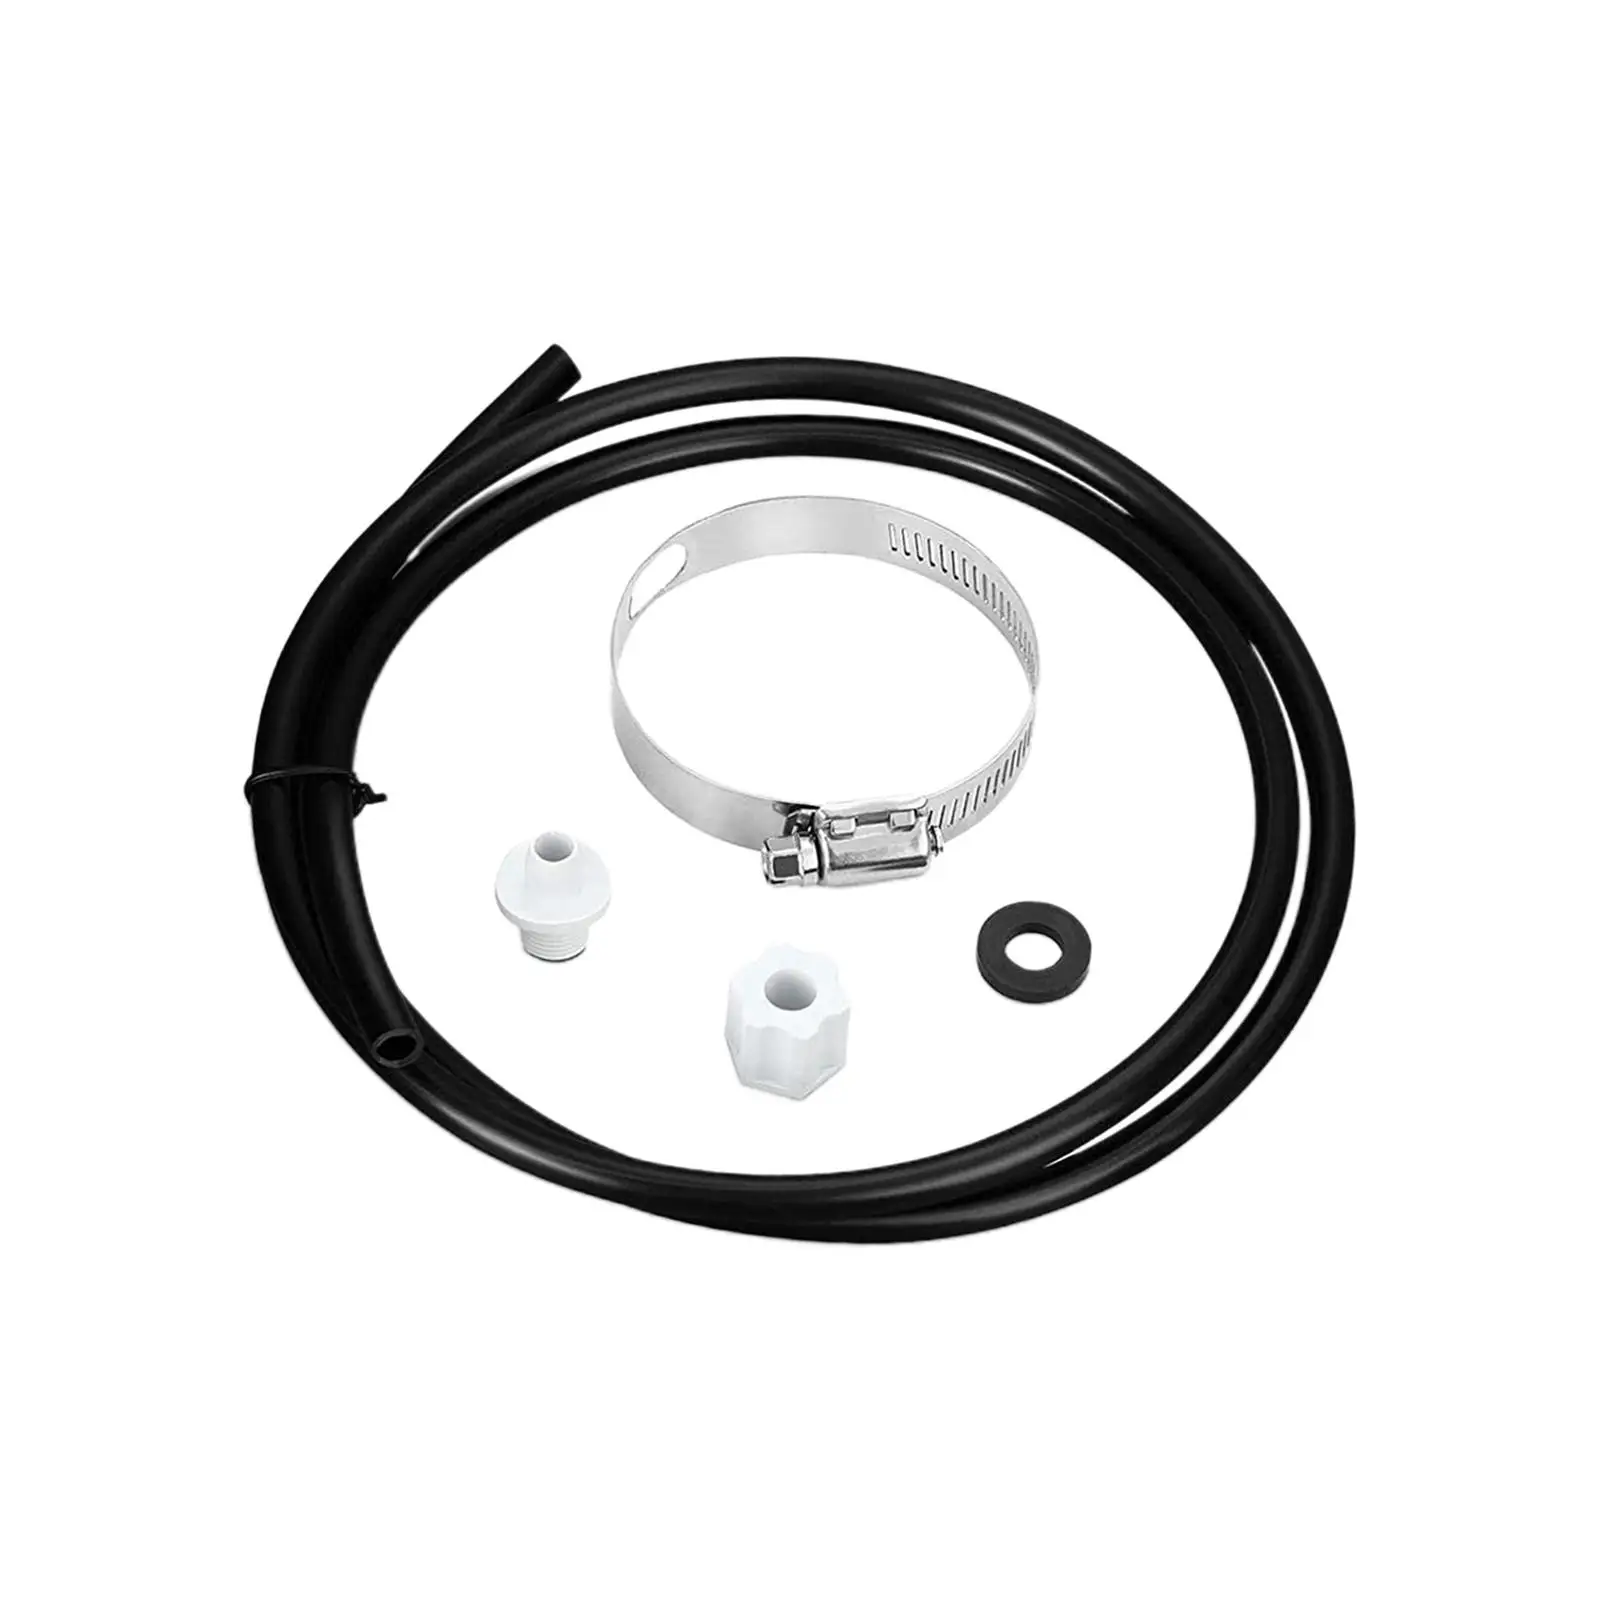 Connection Pack with Saddle Clamp Prevent Backflow of Pool Water 4FT Length with Washers for CL200 CL220 Offline Accessories